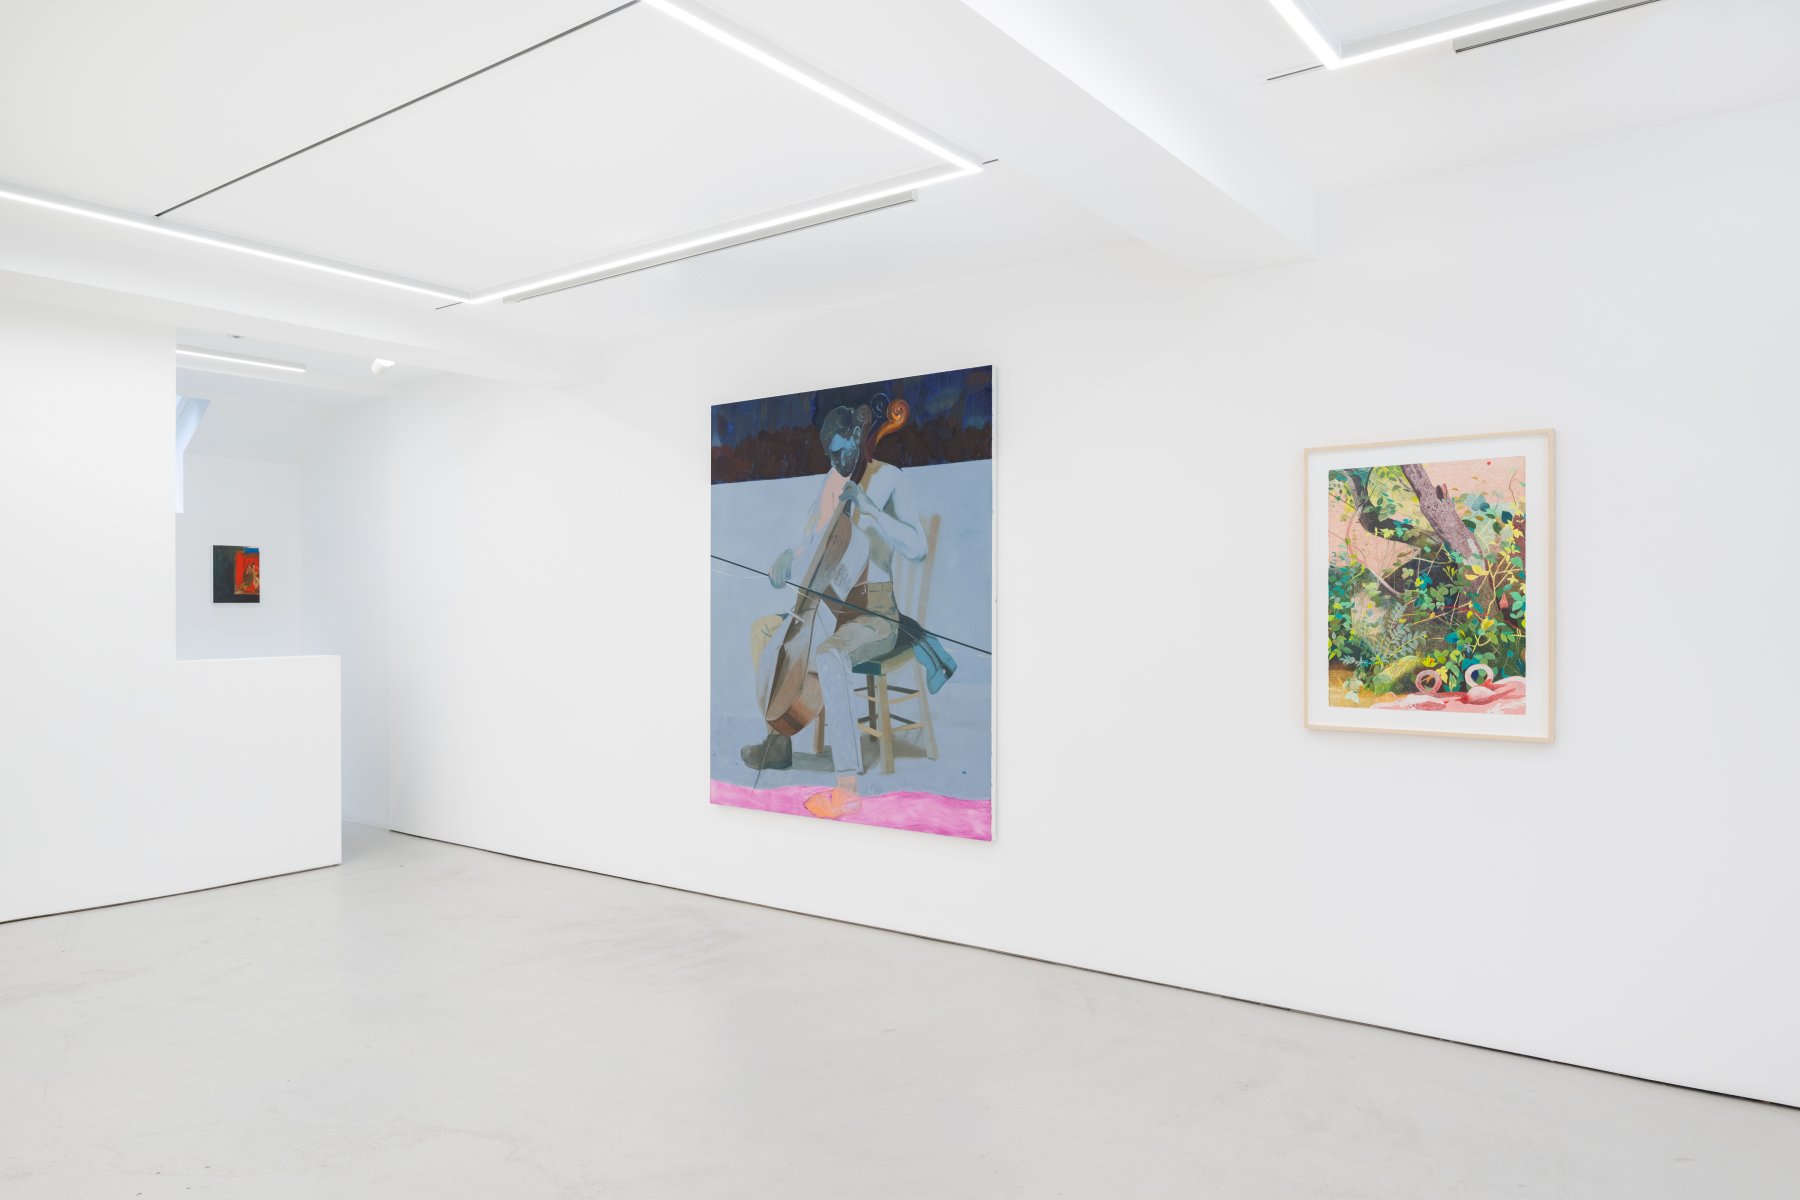 Installation image for Anthony Cudahy: Double Spar, at GRIMM